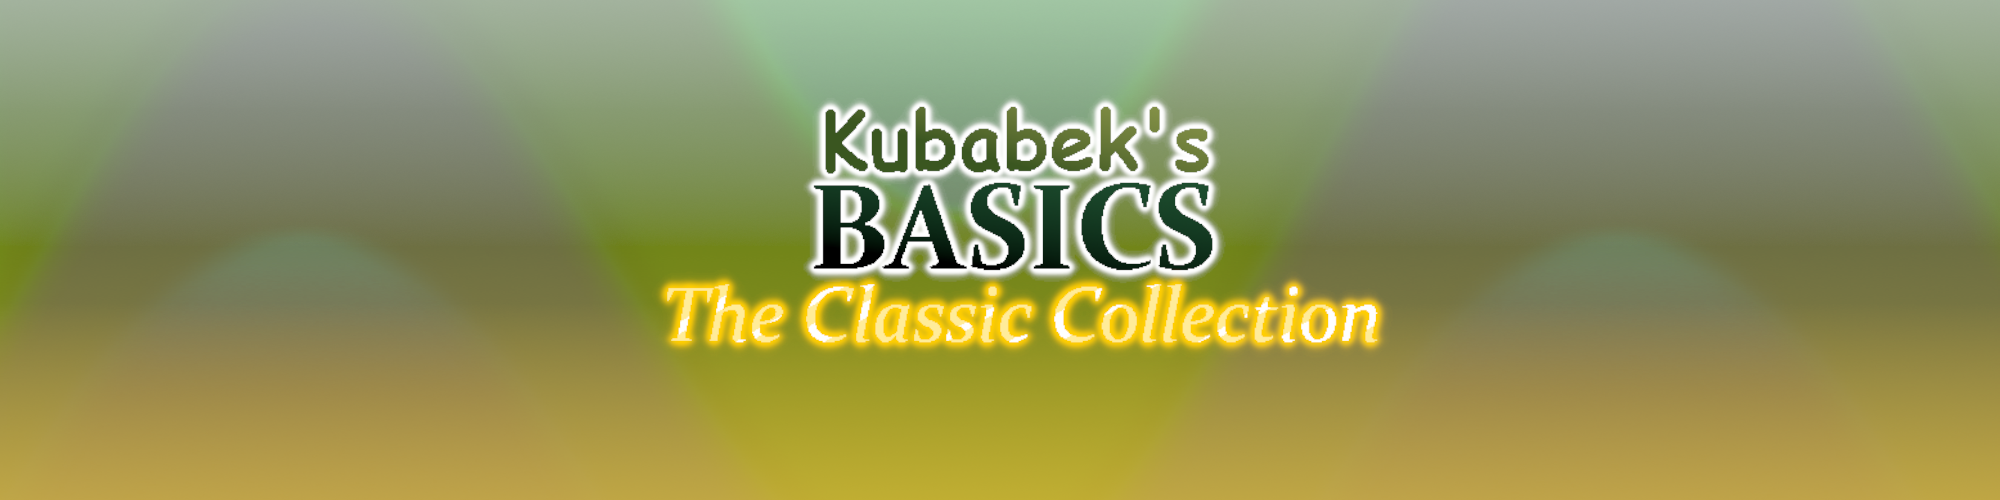 Kubabek's Basics : The Classic Collection